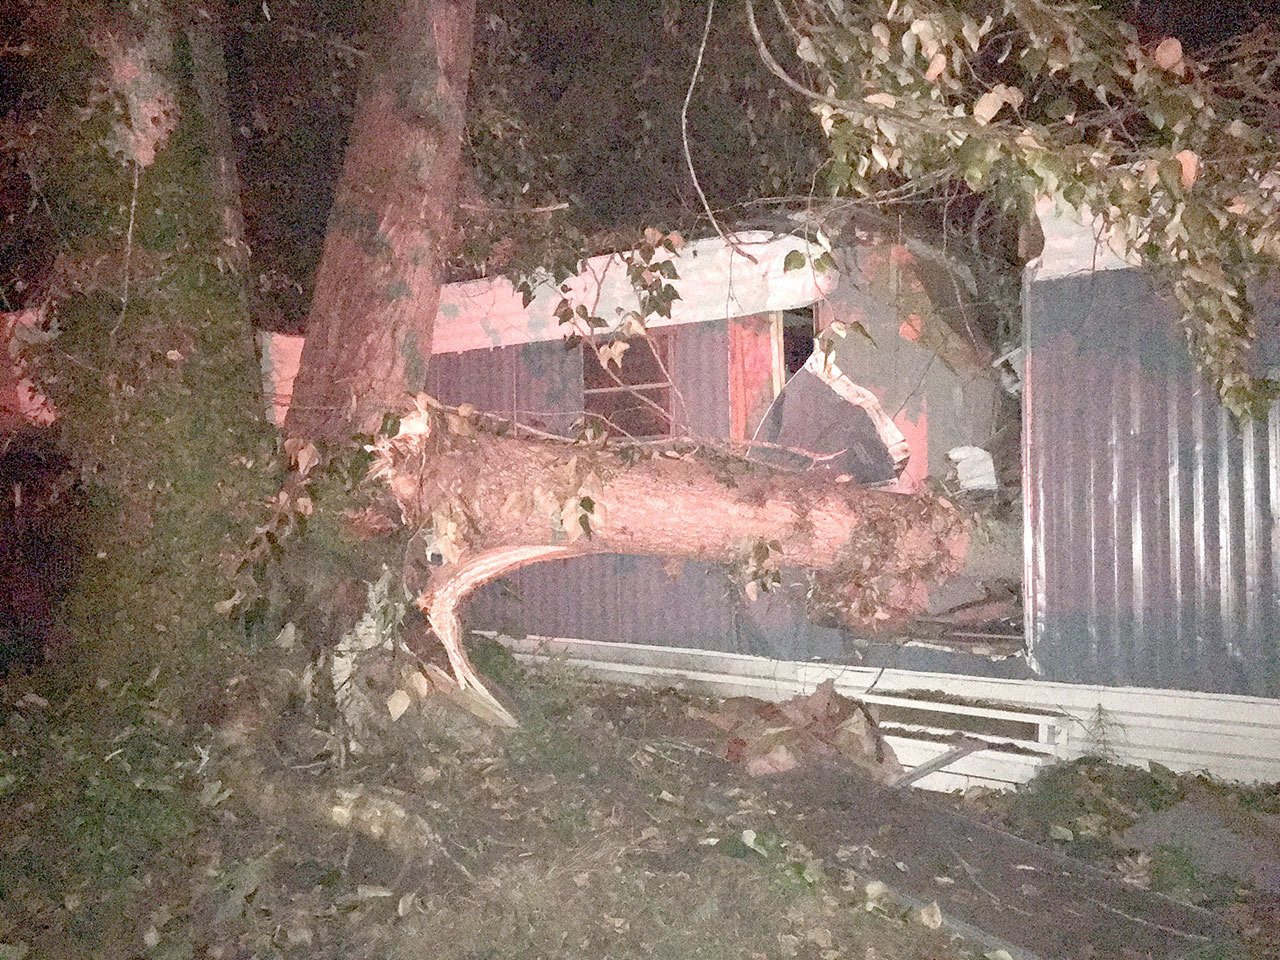 Clallam Fire-Rescue District No. 2 responded to the home at 2221 W. Edgewood Drive at 5:18 a.m. after a cottonwood tree fell on it, trapping two residents inside. (Mike DeRousie/Clallam Fire District No. 2)